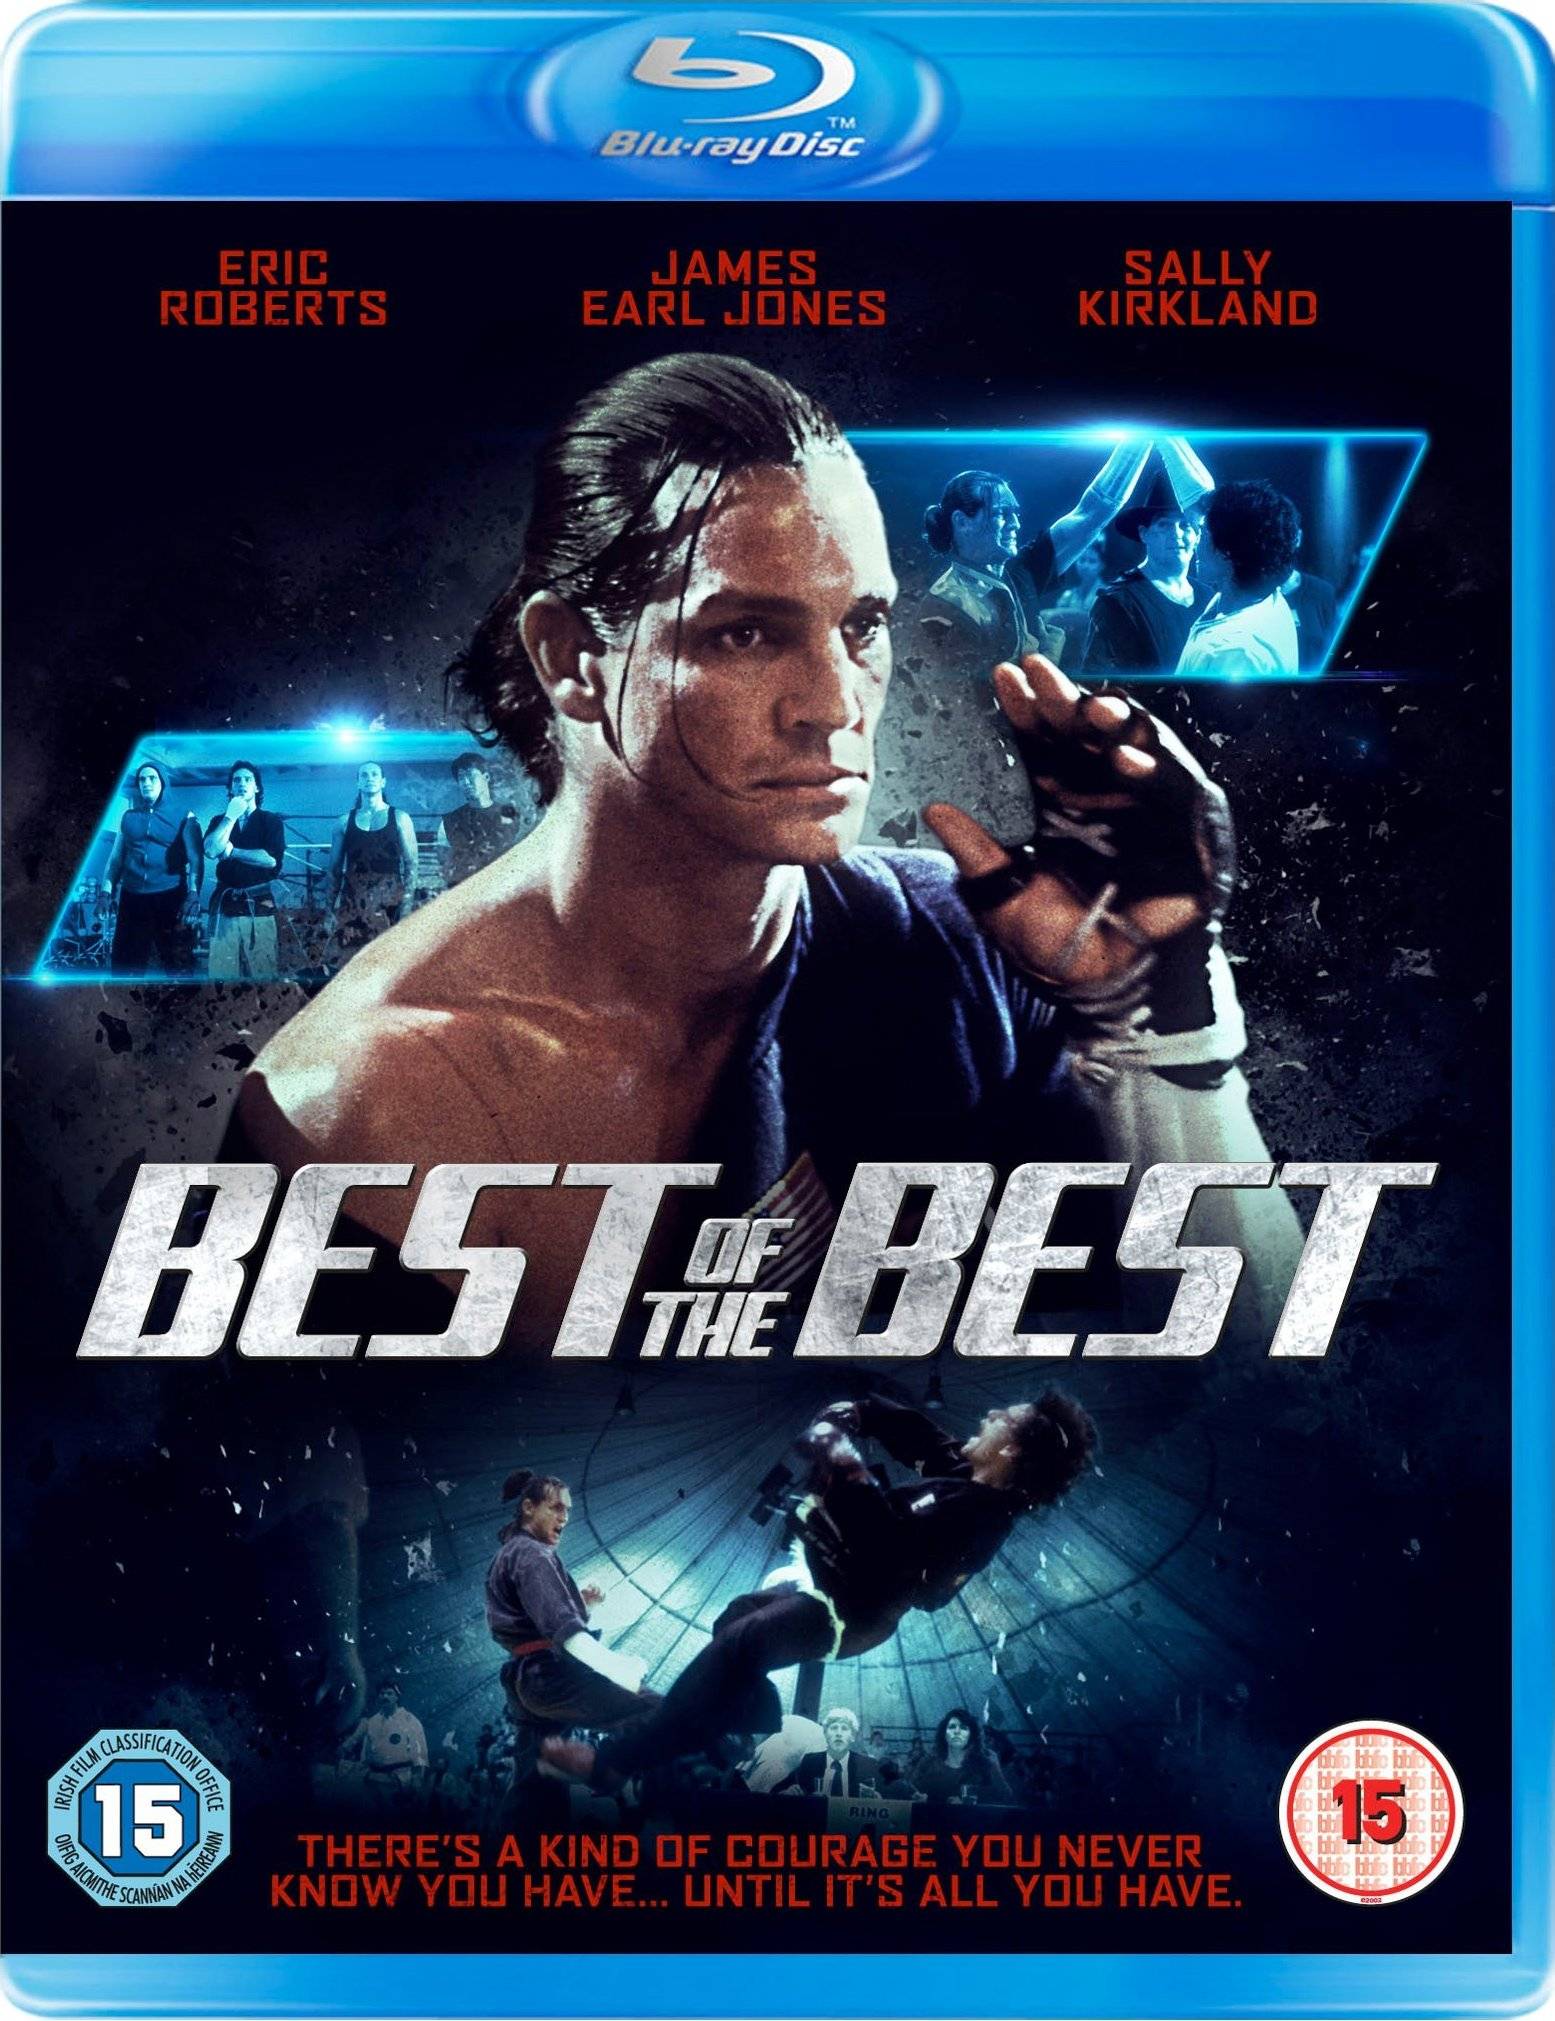 Best of the Best (1989)